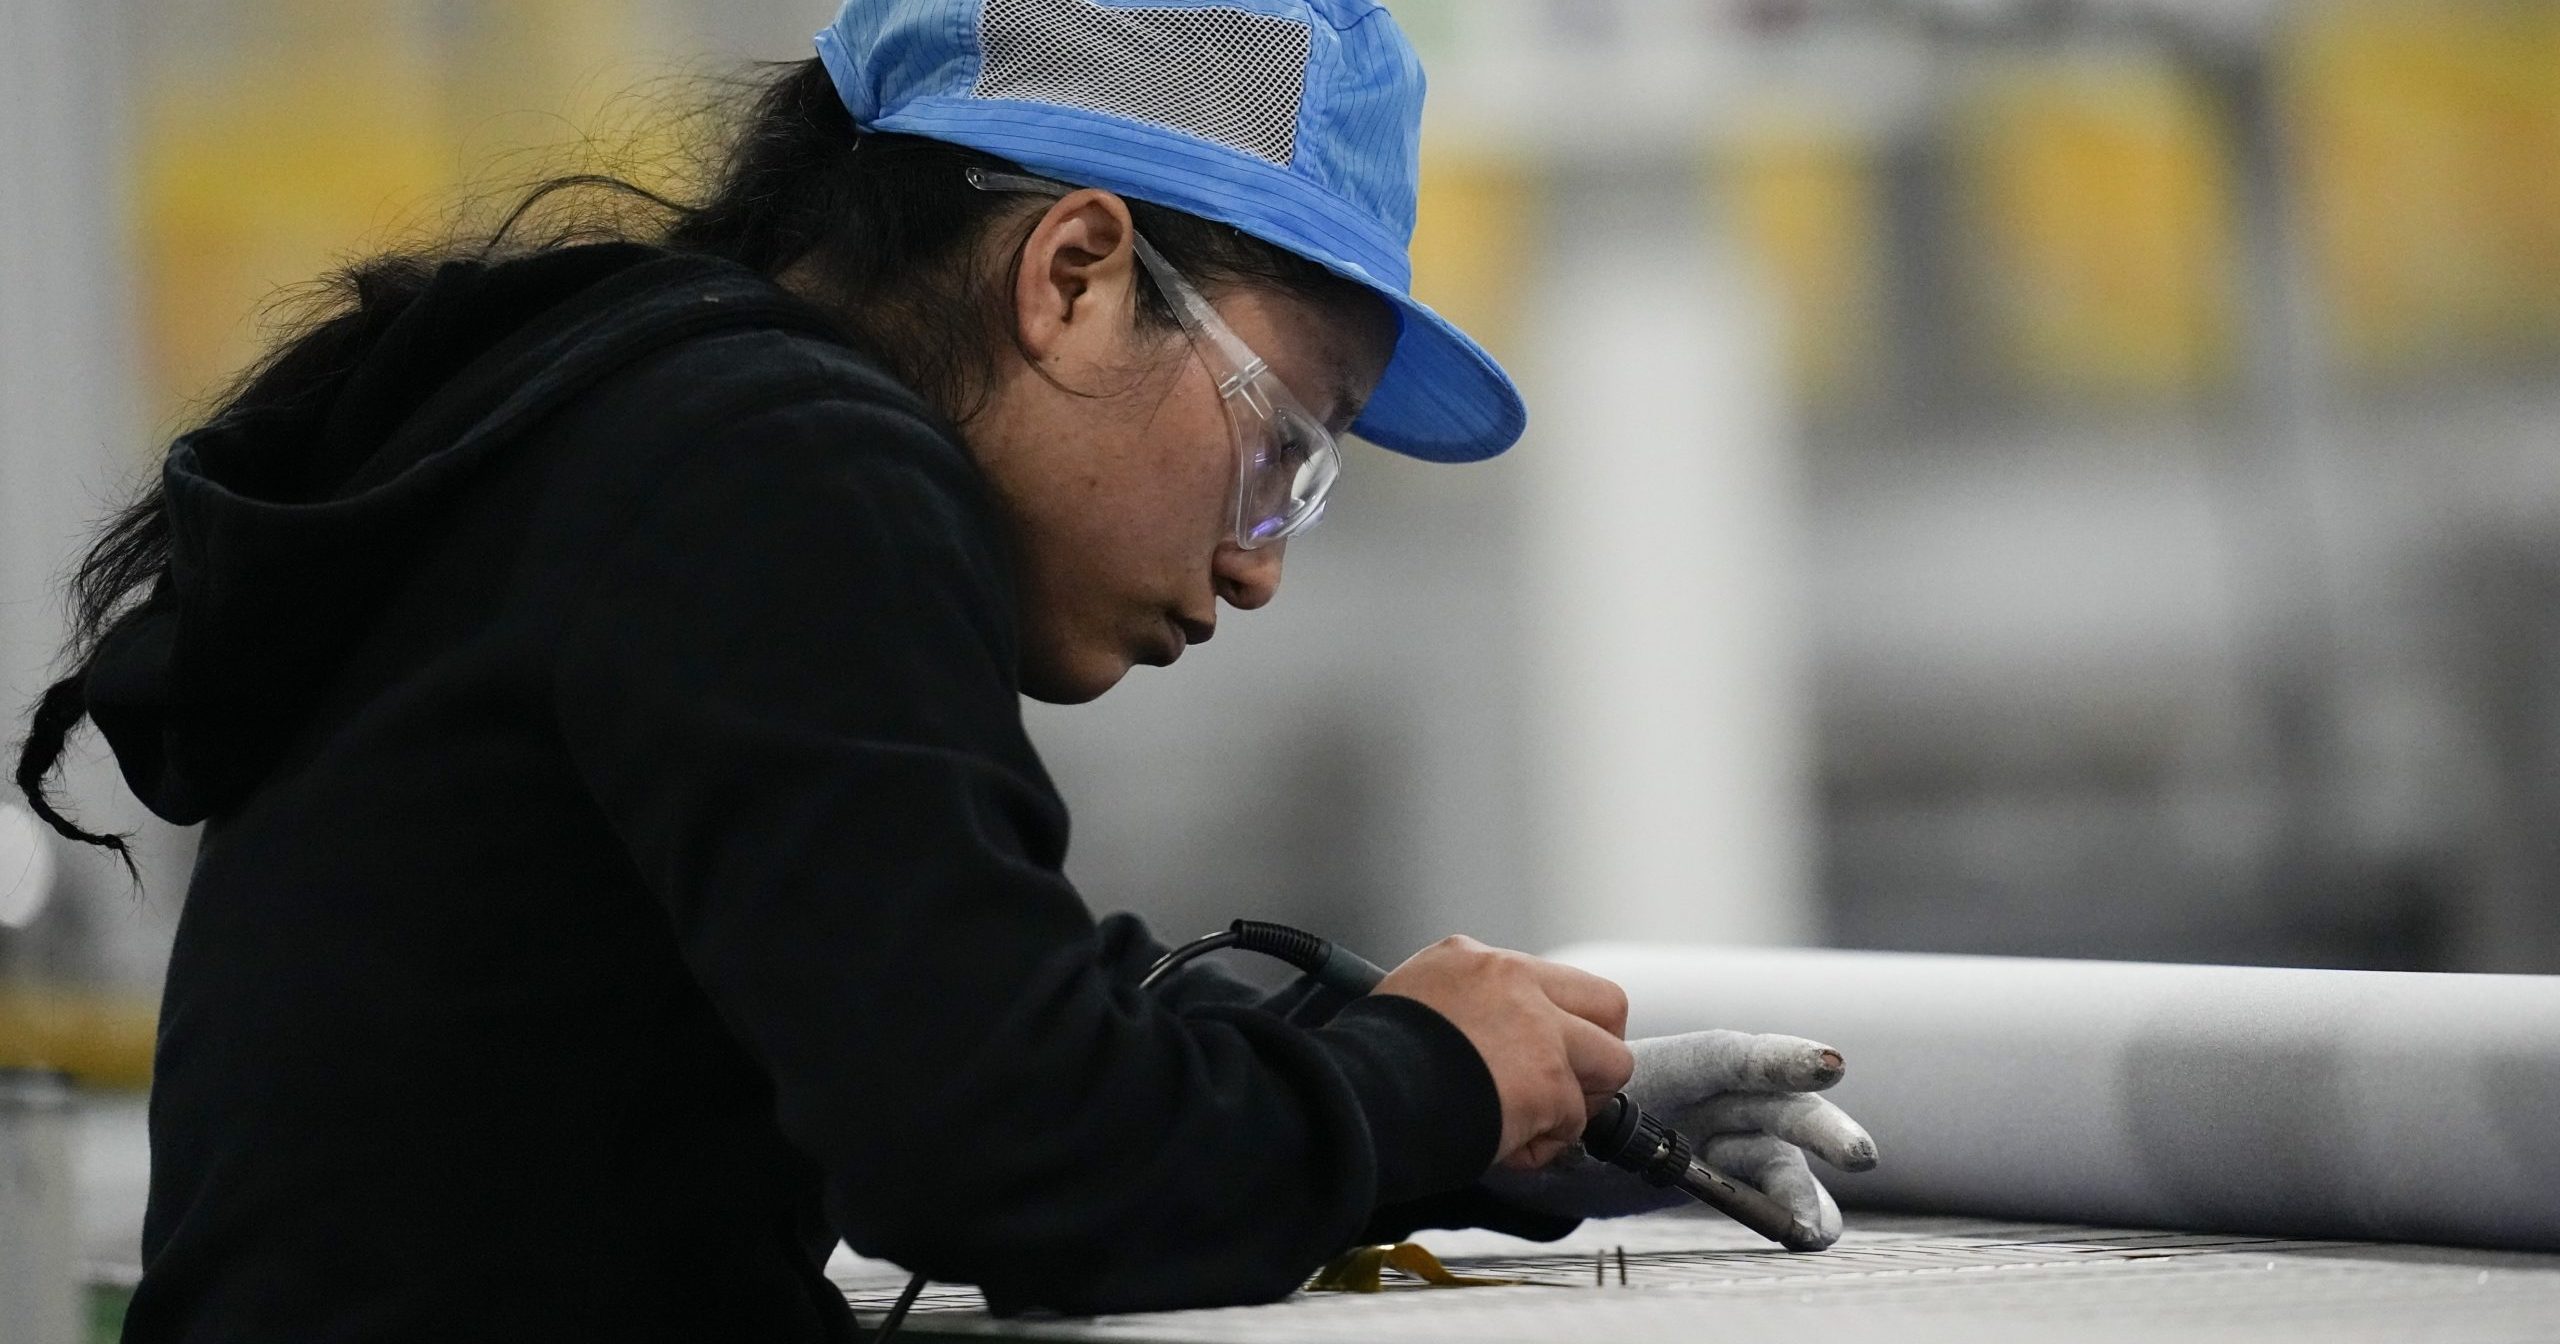 An employee works inside the Hanwha Qcells Solar plant in Dalton, Georgia, on Oct. 16.